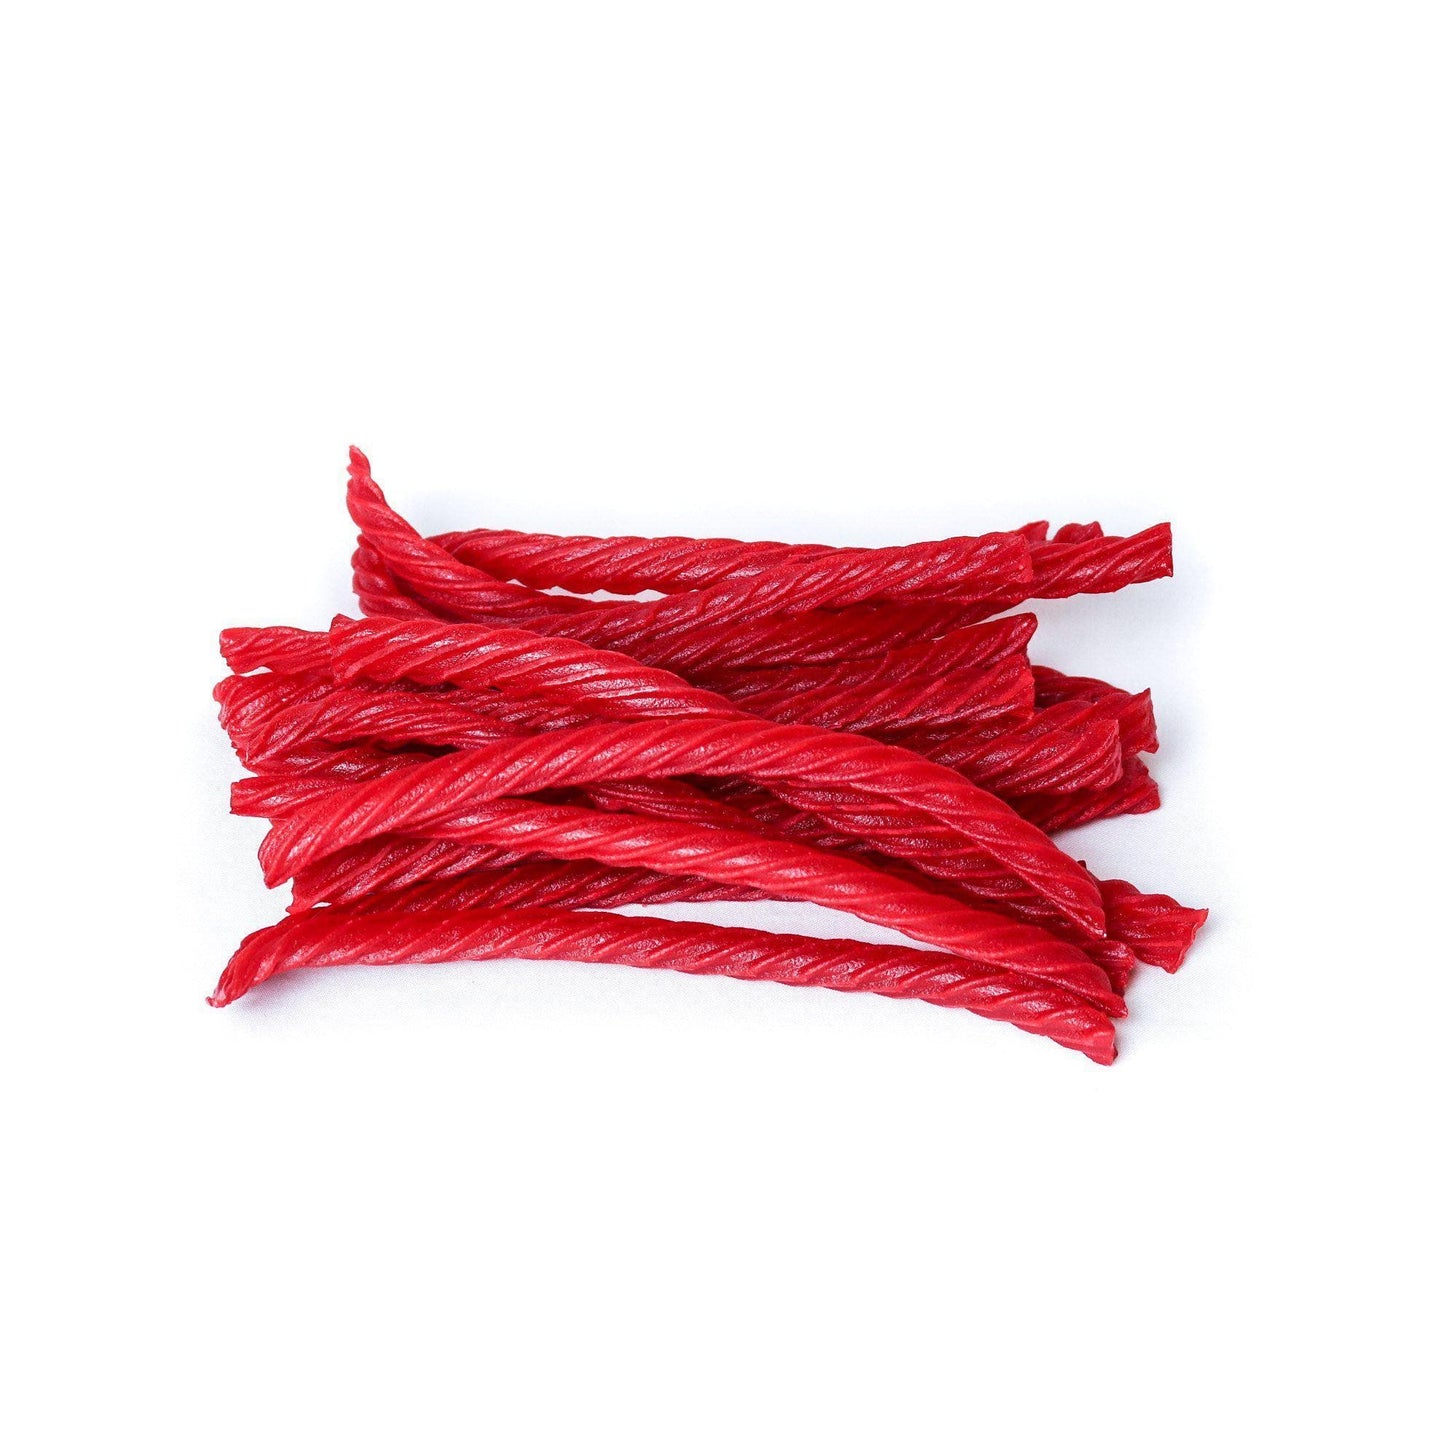 RED VINES Original Red Licorice Twists candy in a pile